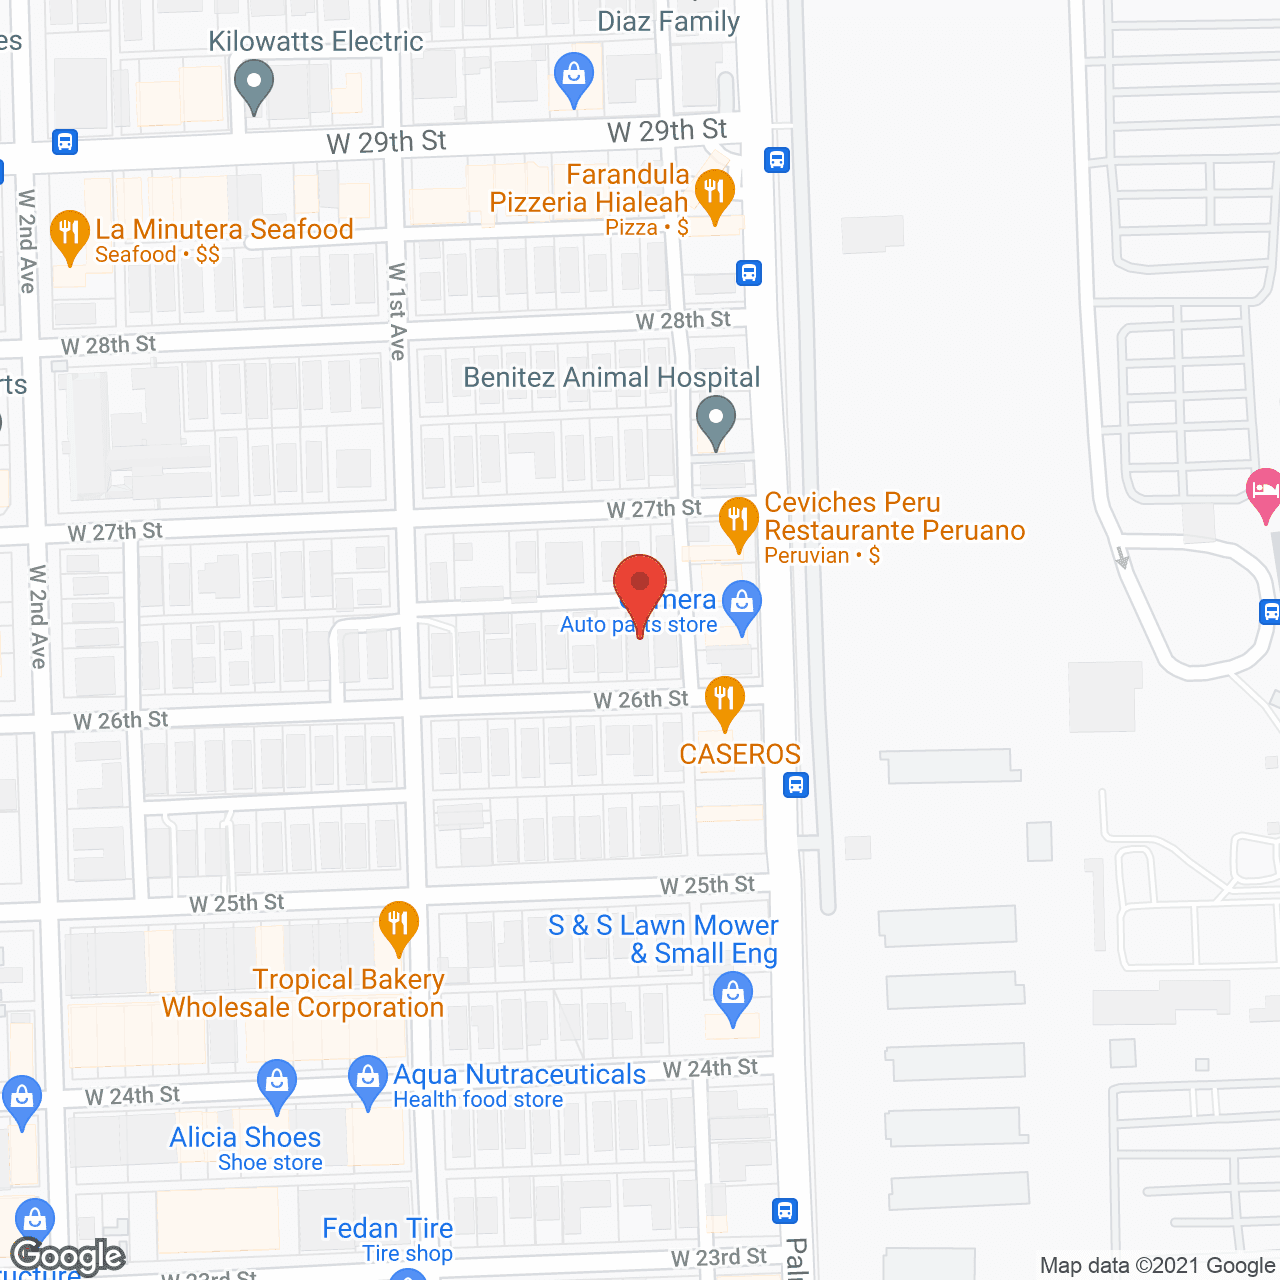 Oasis Home For the Elderly in google map